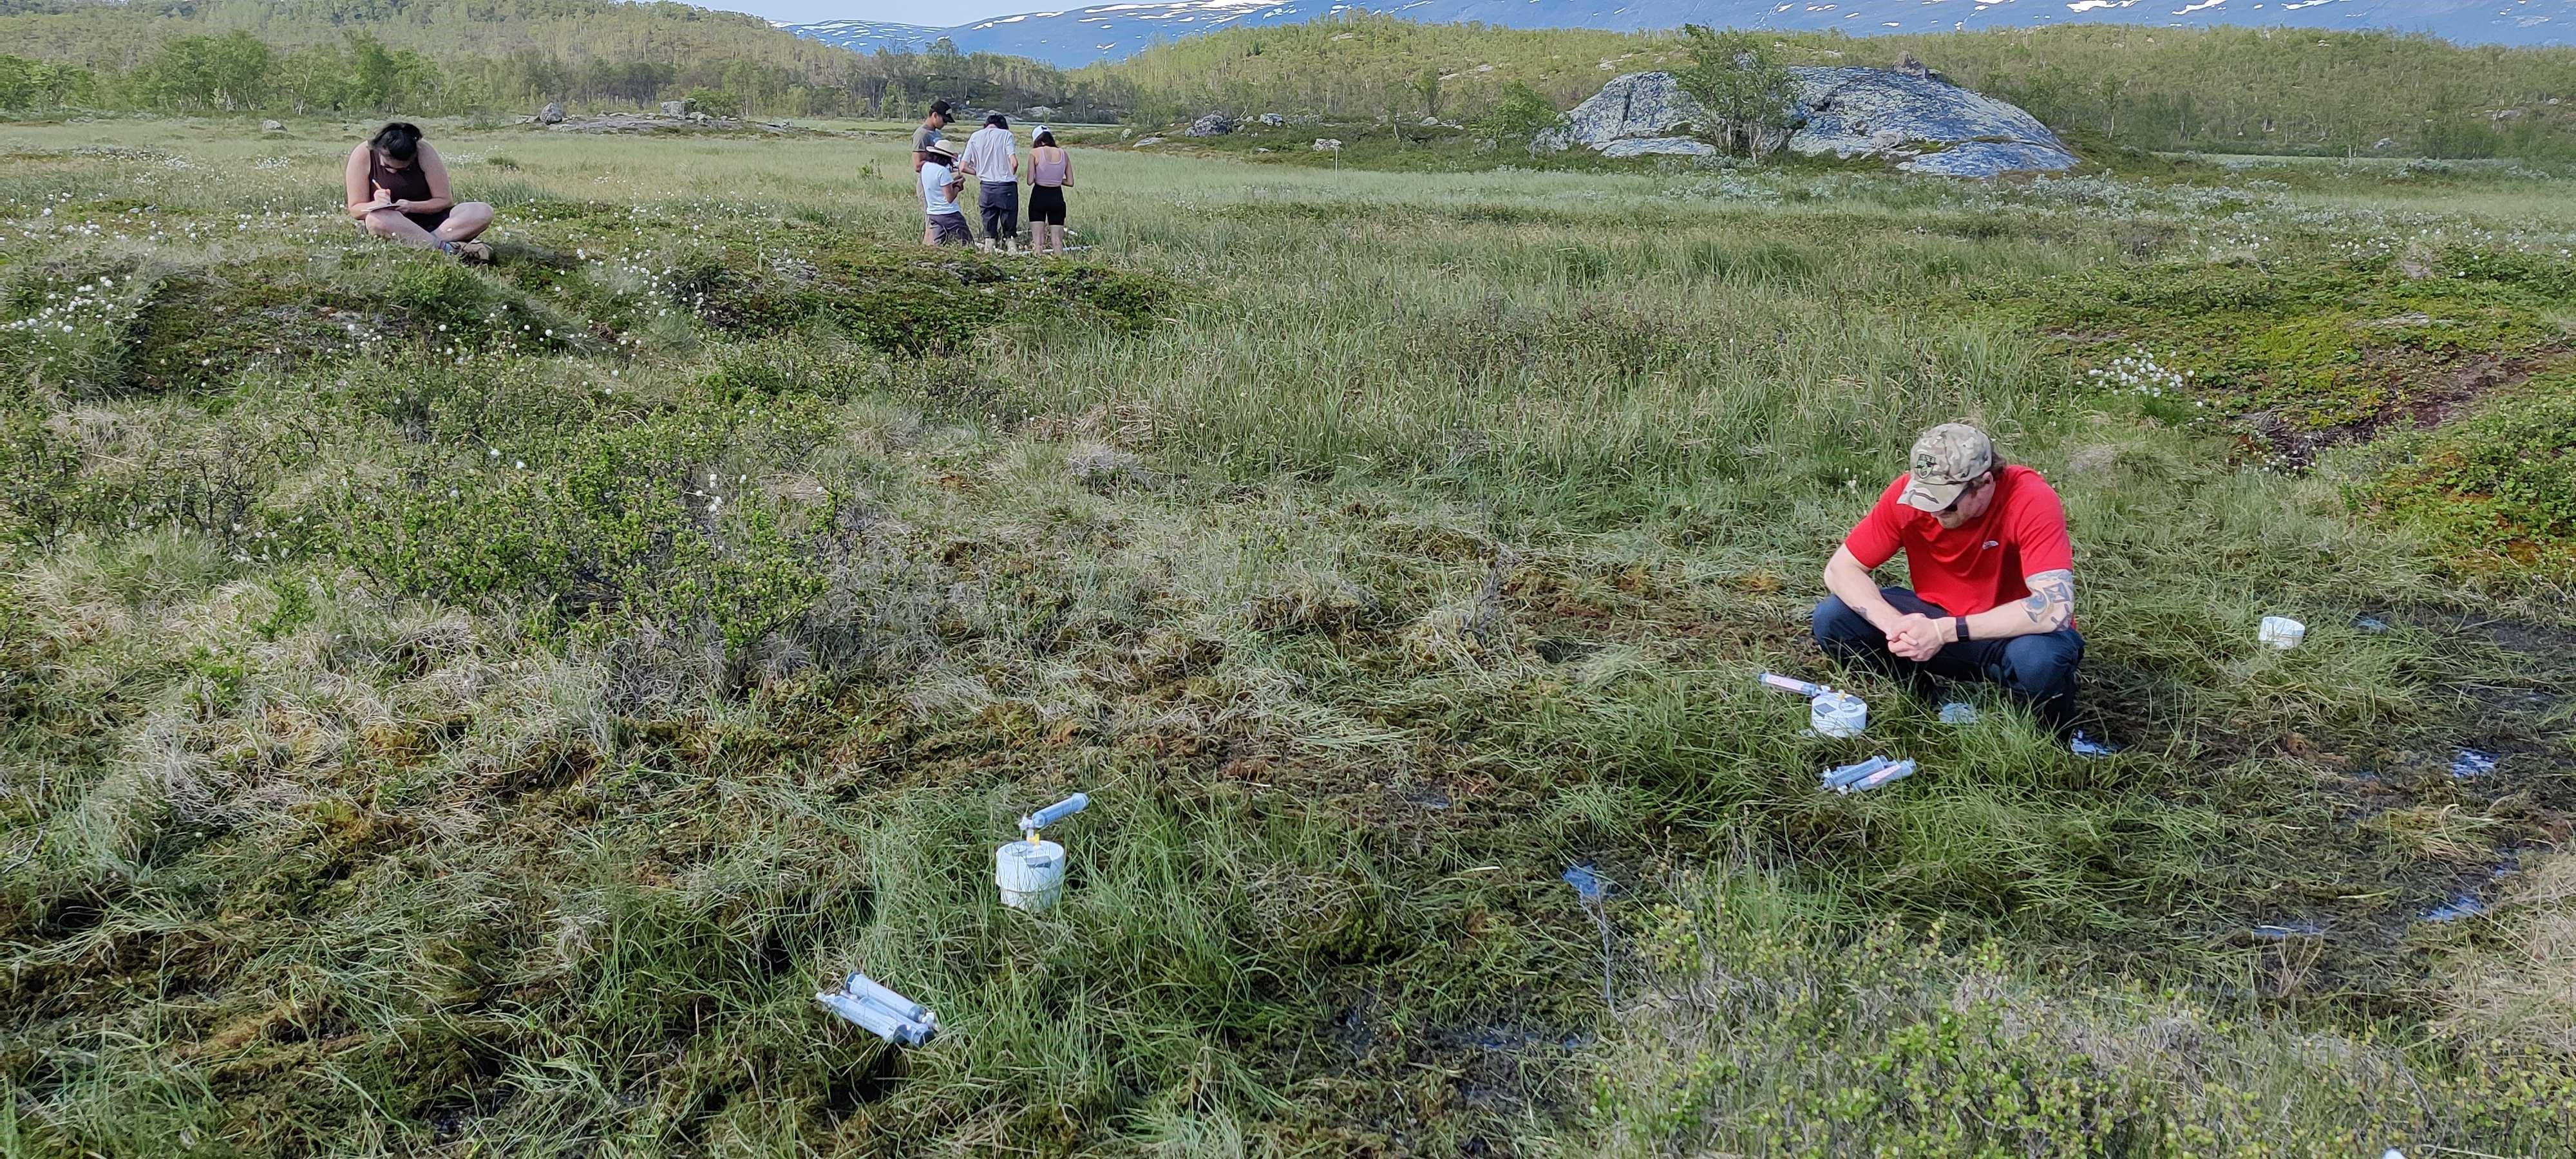 Undergraduate students hard at work in the Stordalen mire, collecting data for ongoing and new research projects, including methane and carbon flux measurements and vegetation quantification. Photo credit: Hannah Holland-Moritz